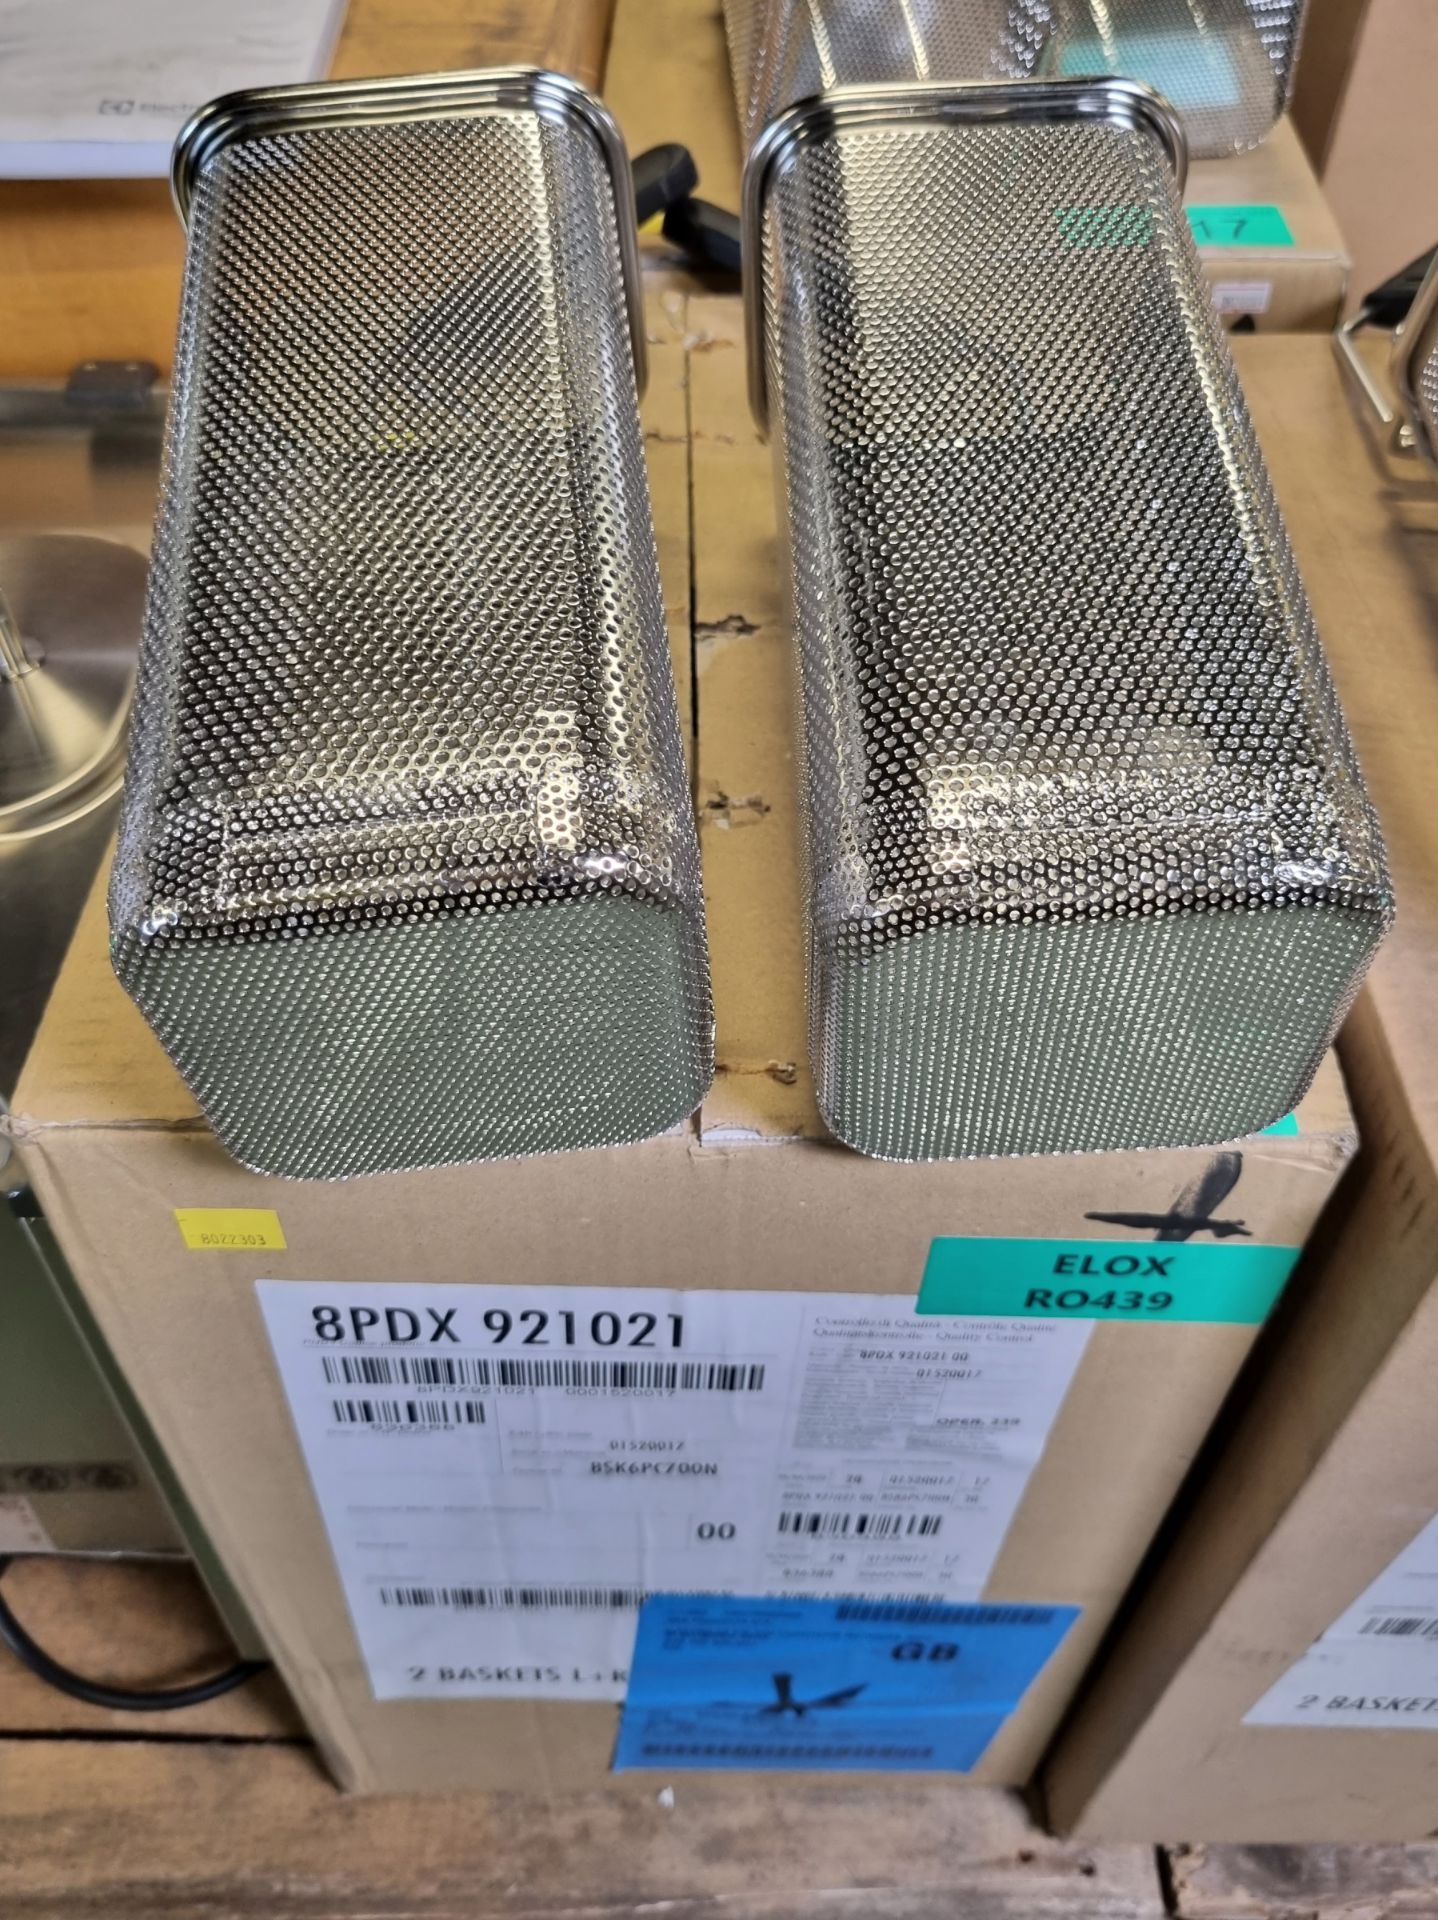 2x Electrolux Baskets for Pasta Cooker - Left and Right